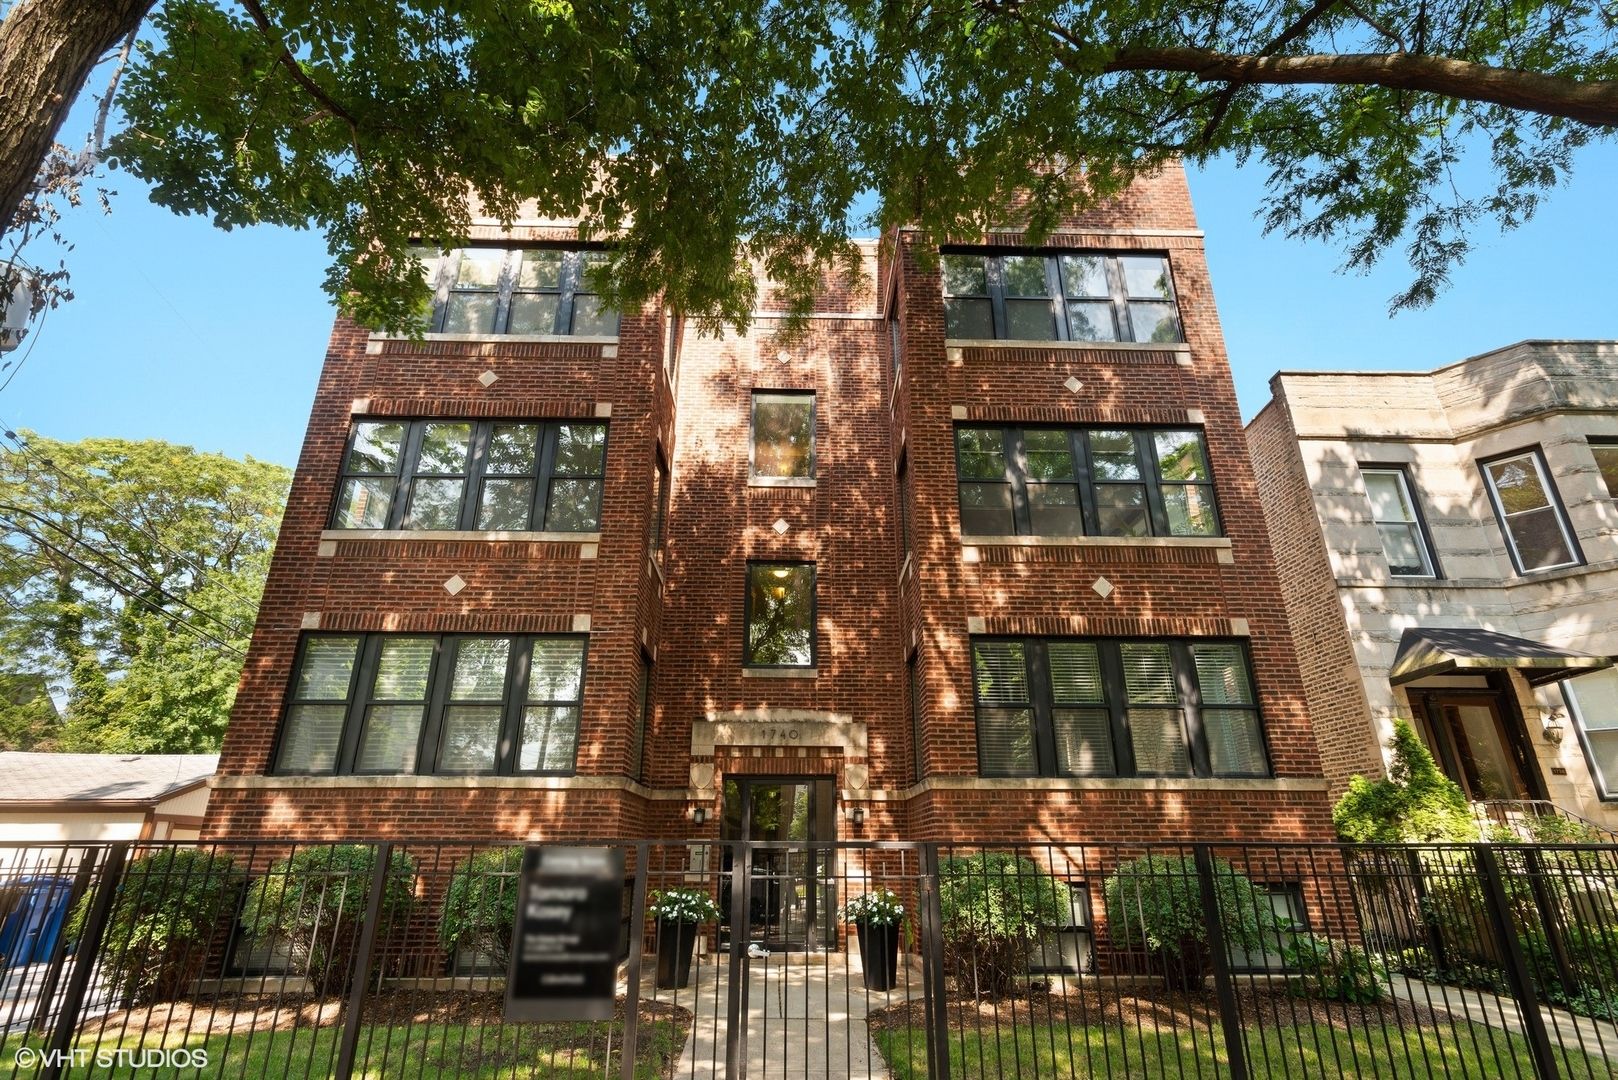 Main Photo: 1740 W Catalpa Avenue Unit 3W in Chicago: CHI - Edgewater Residential for sale ()  : MLS®# 11625149